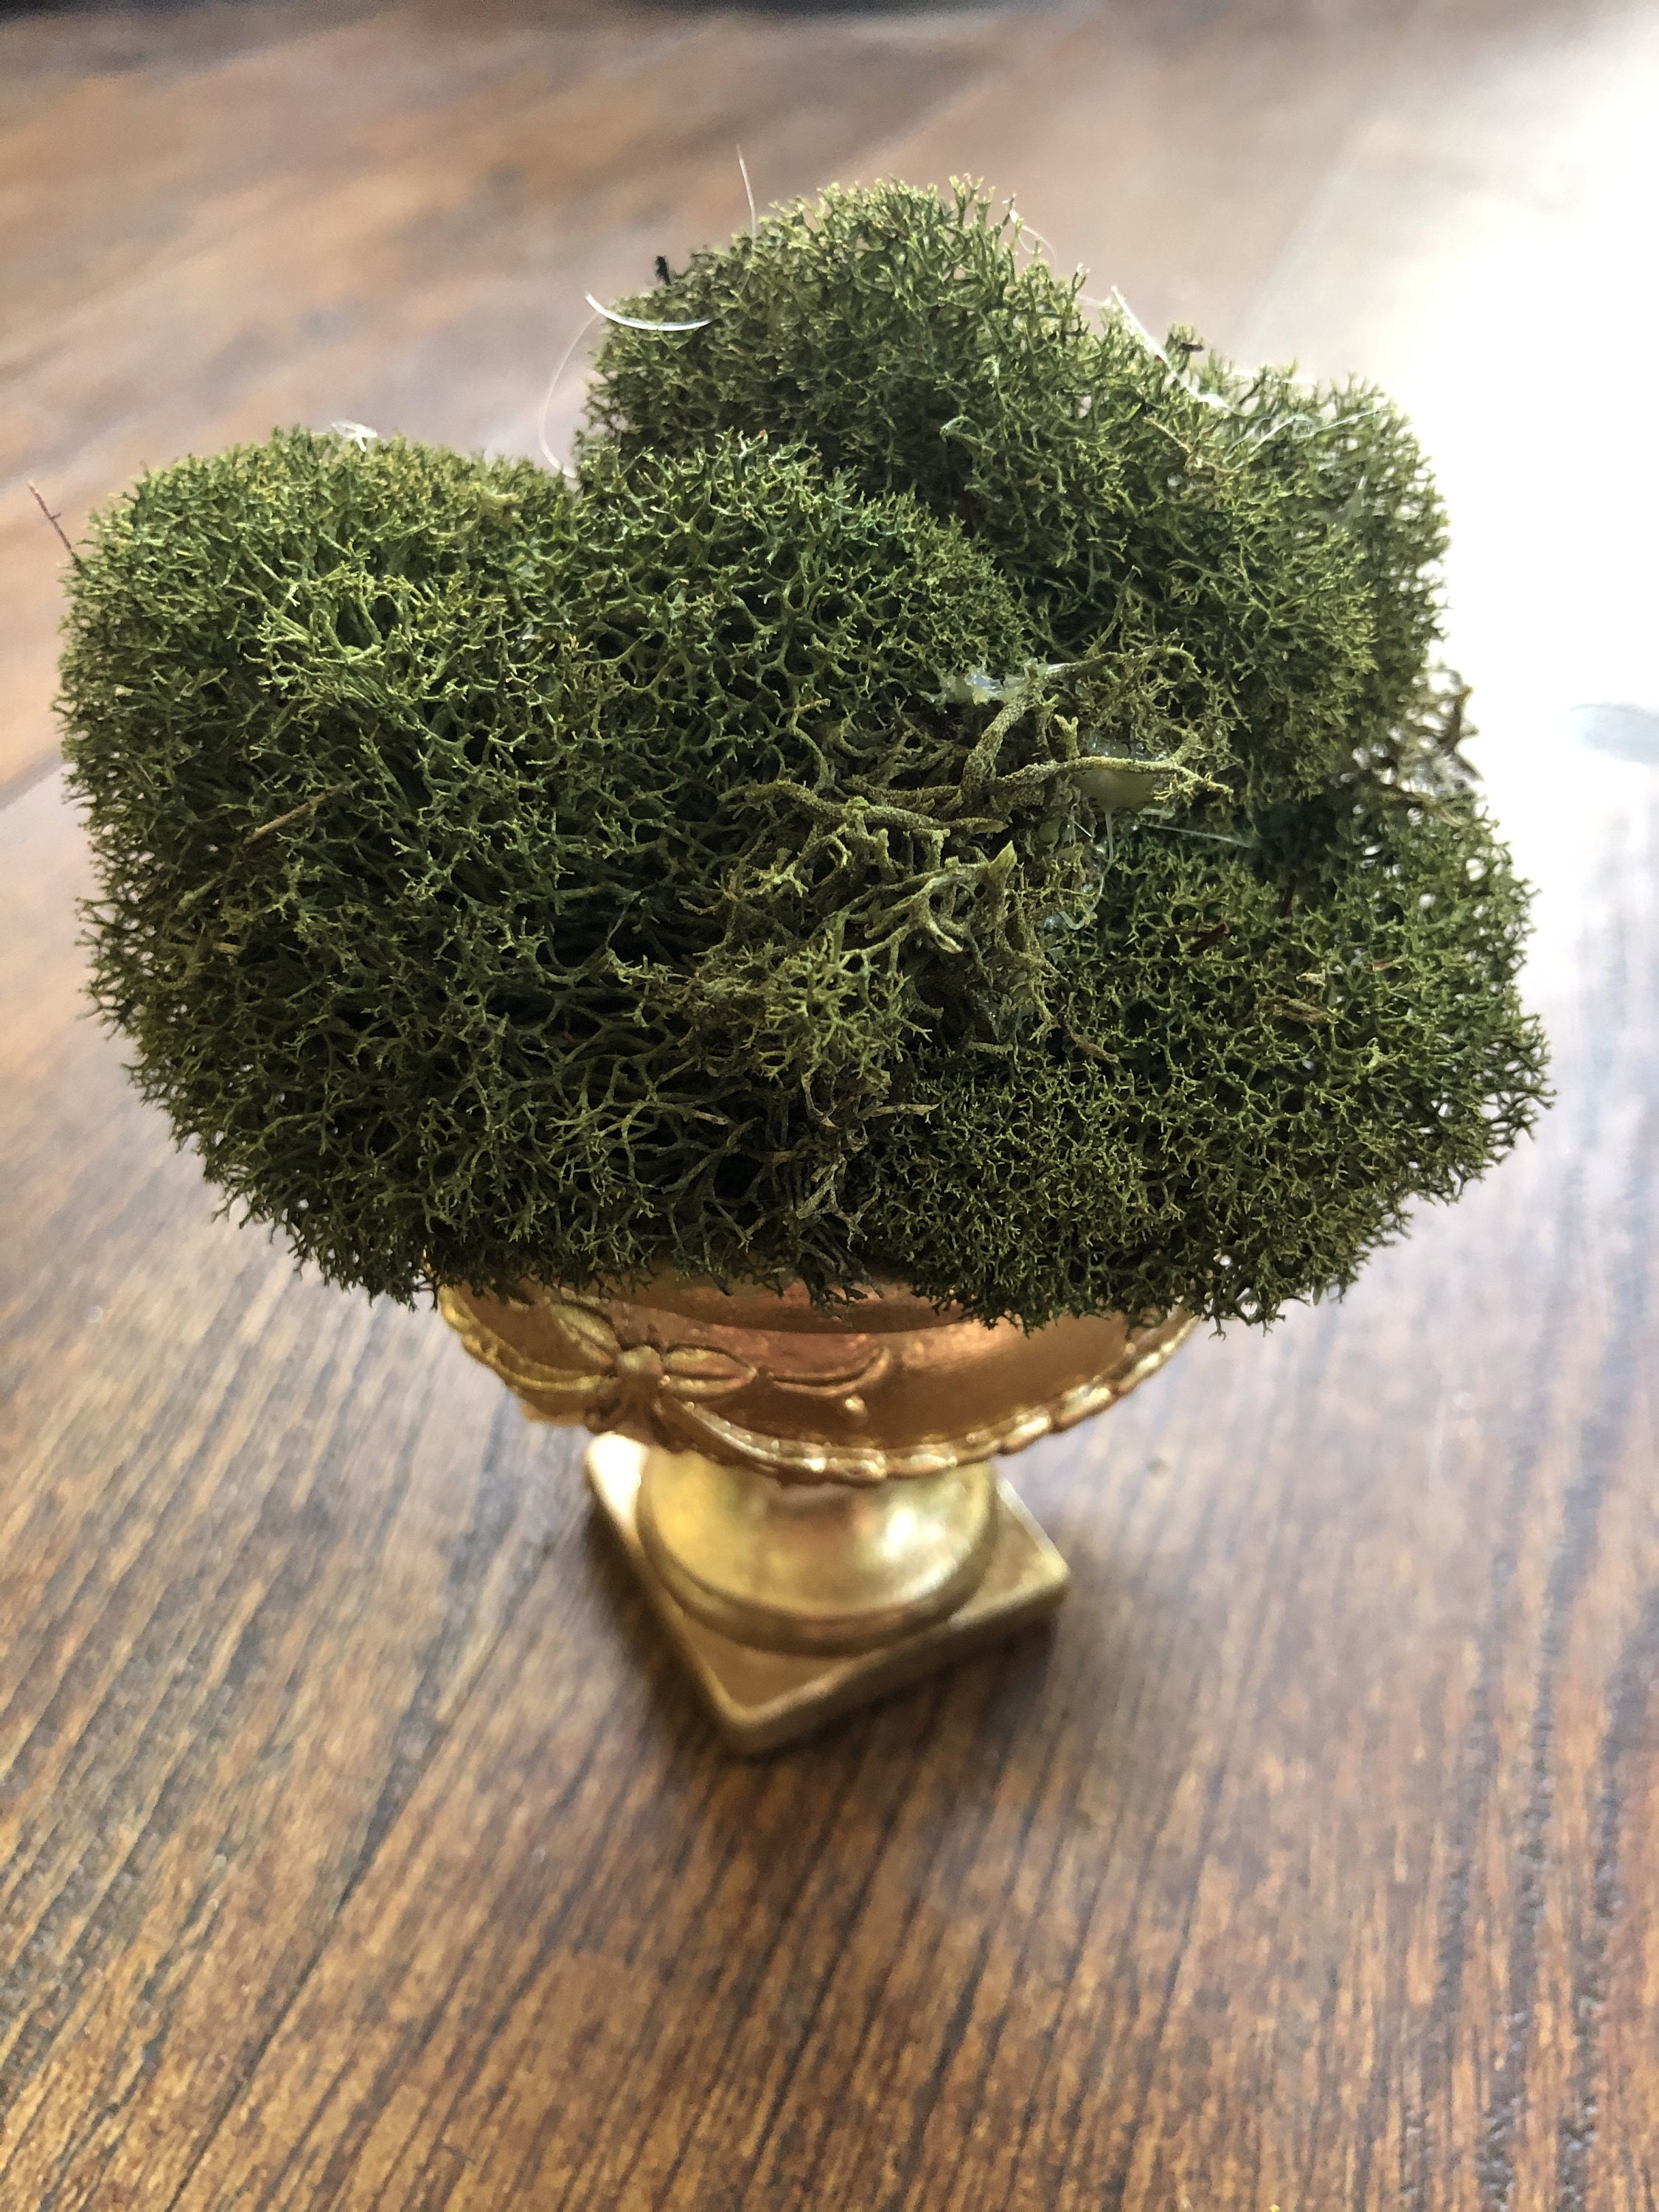 Decorative Artificial Dried Moss Balls with Vine – Floral Supplies